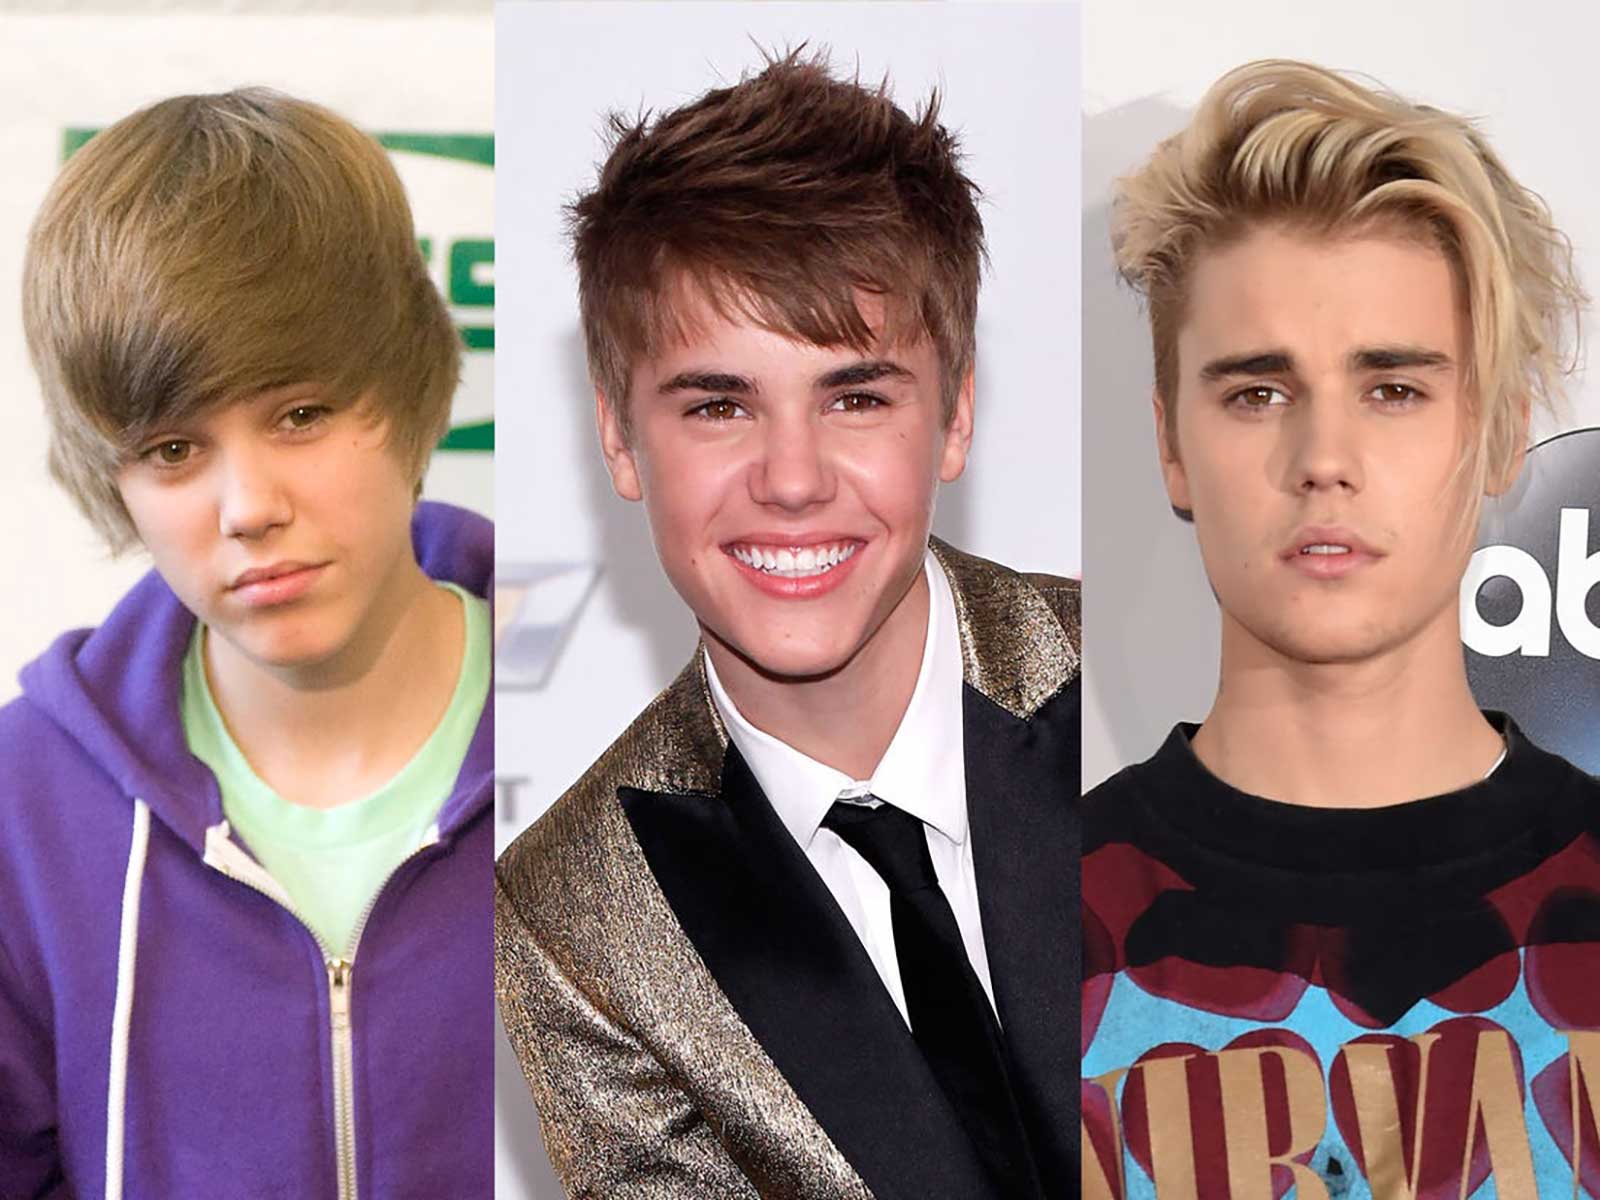 Love Justin Bieber songs? Will you listen if the assault rumors are ...